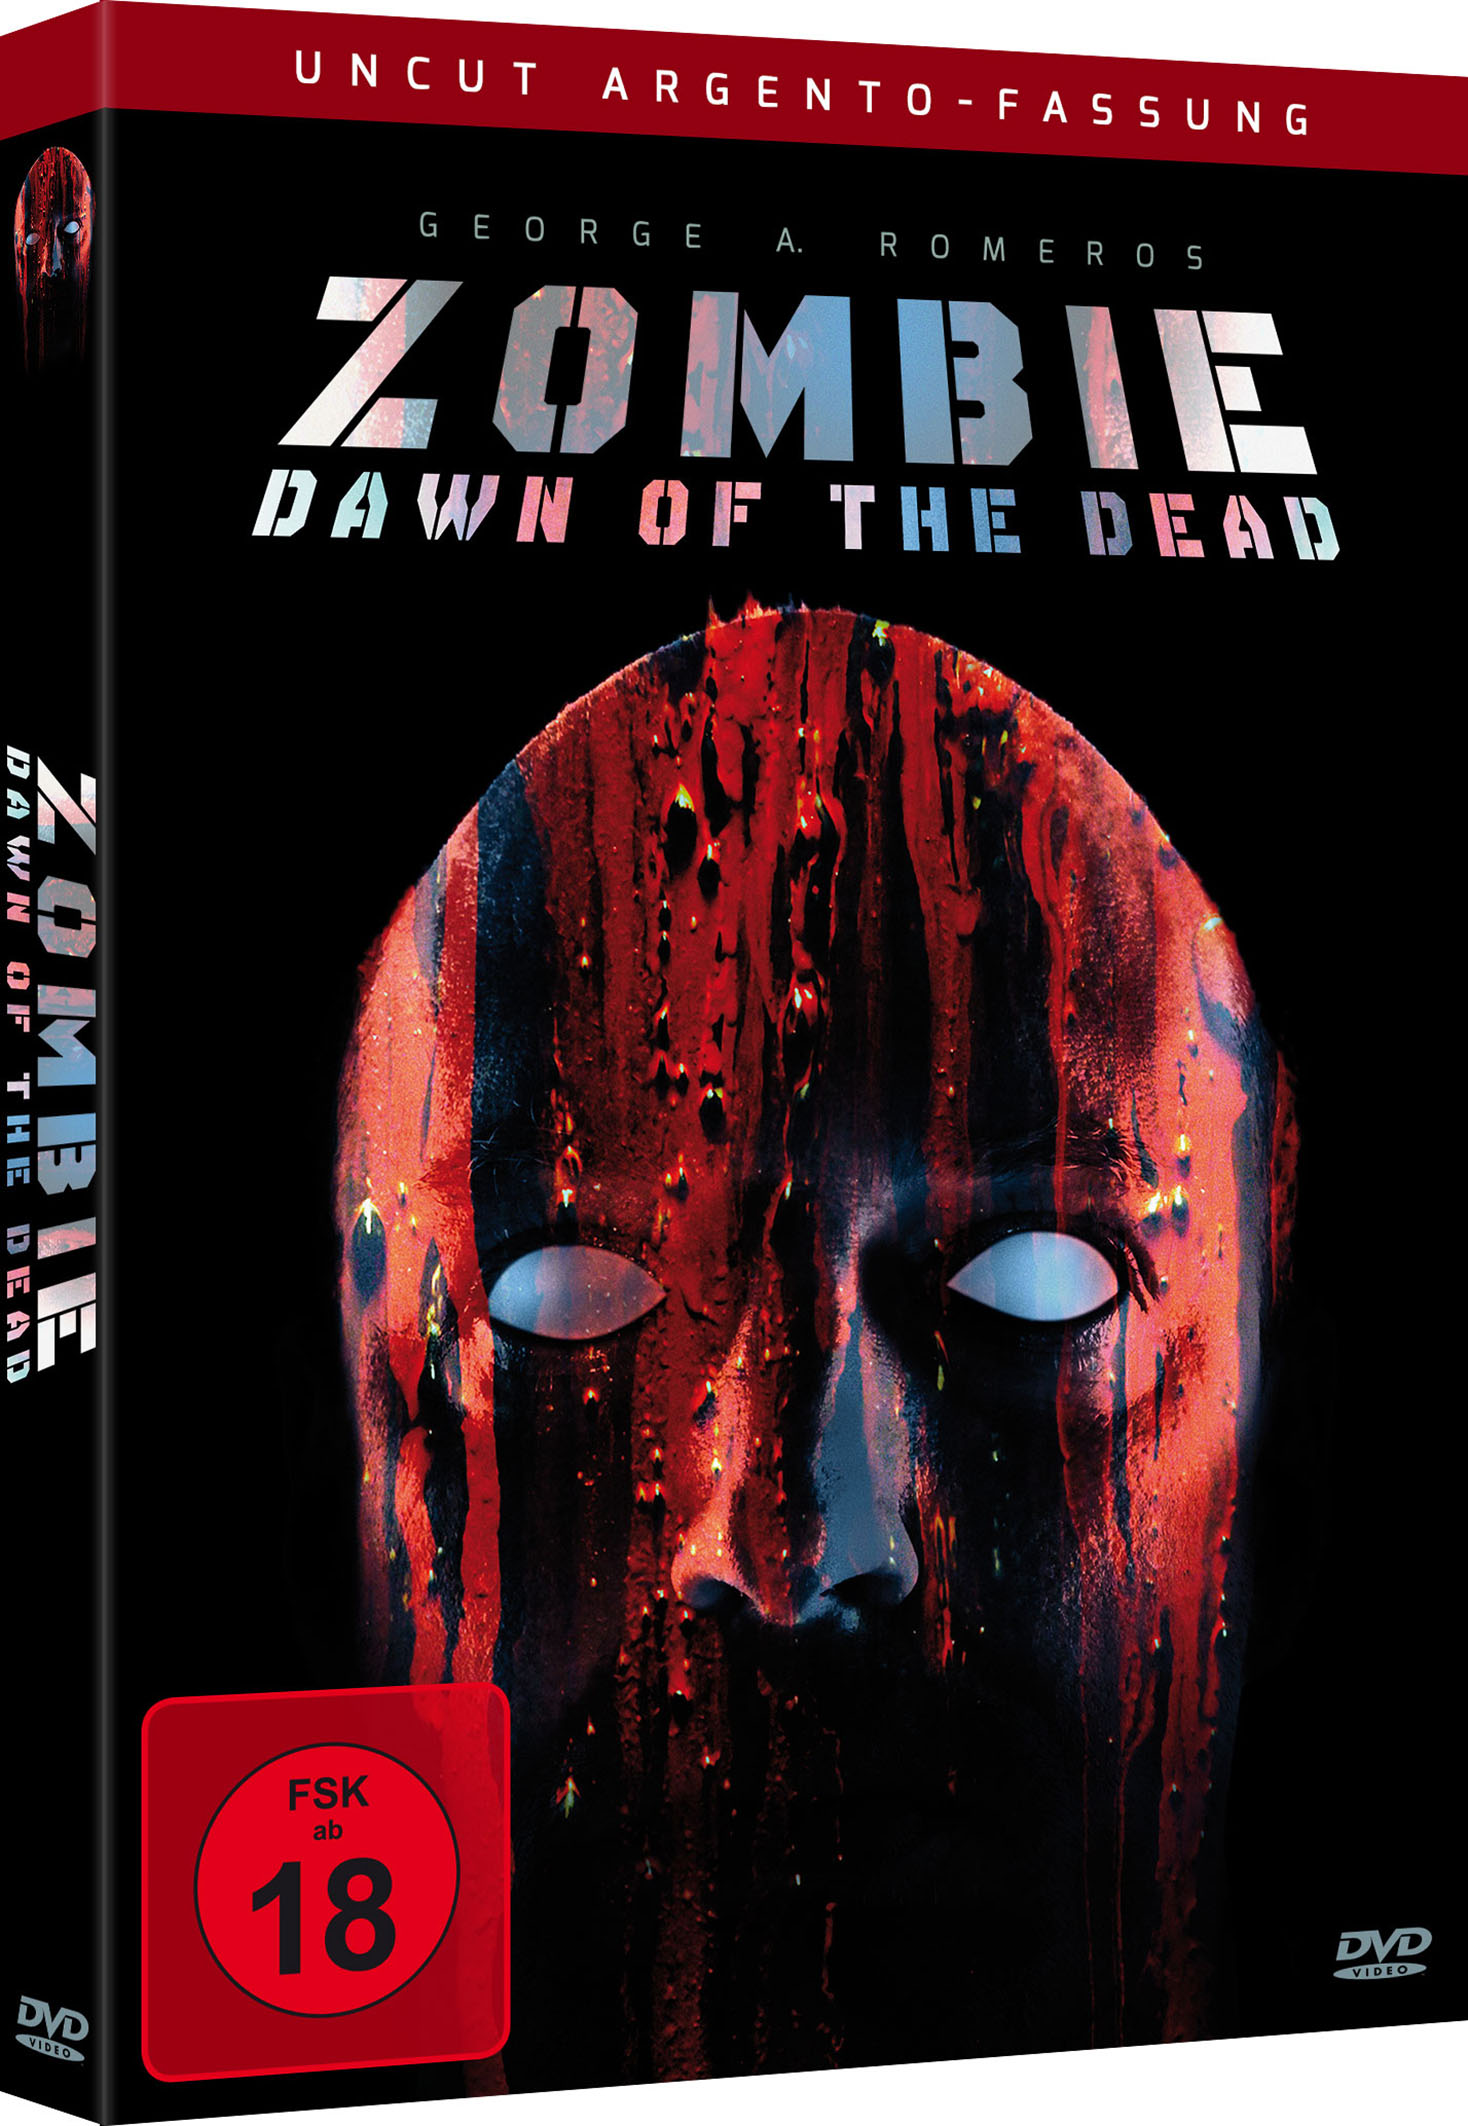 Zombie - Dawn of the Dead (DVD) Image 2